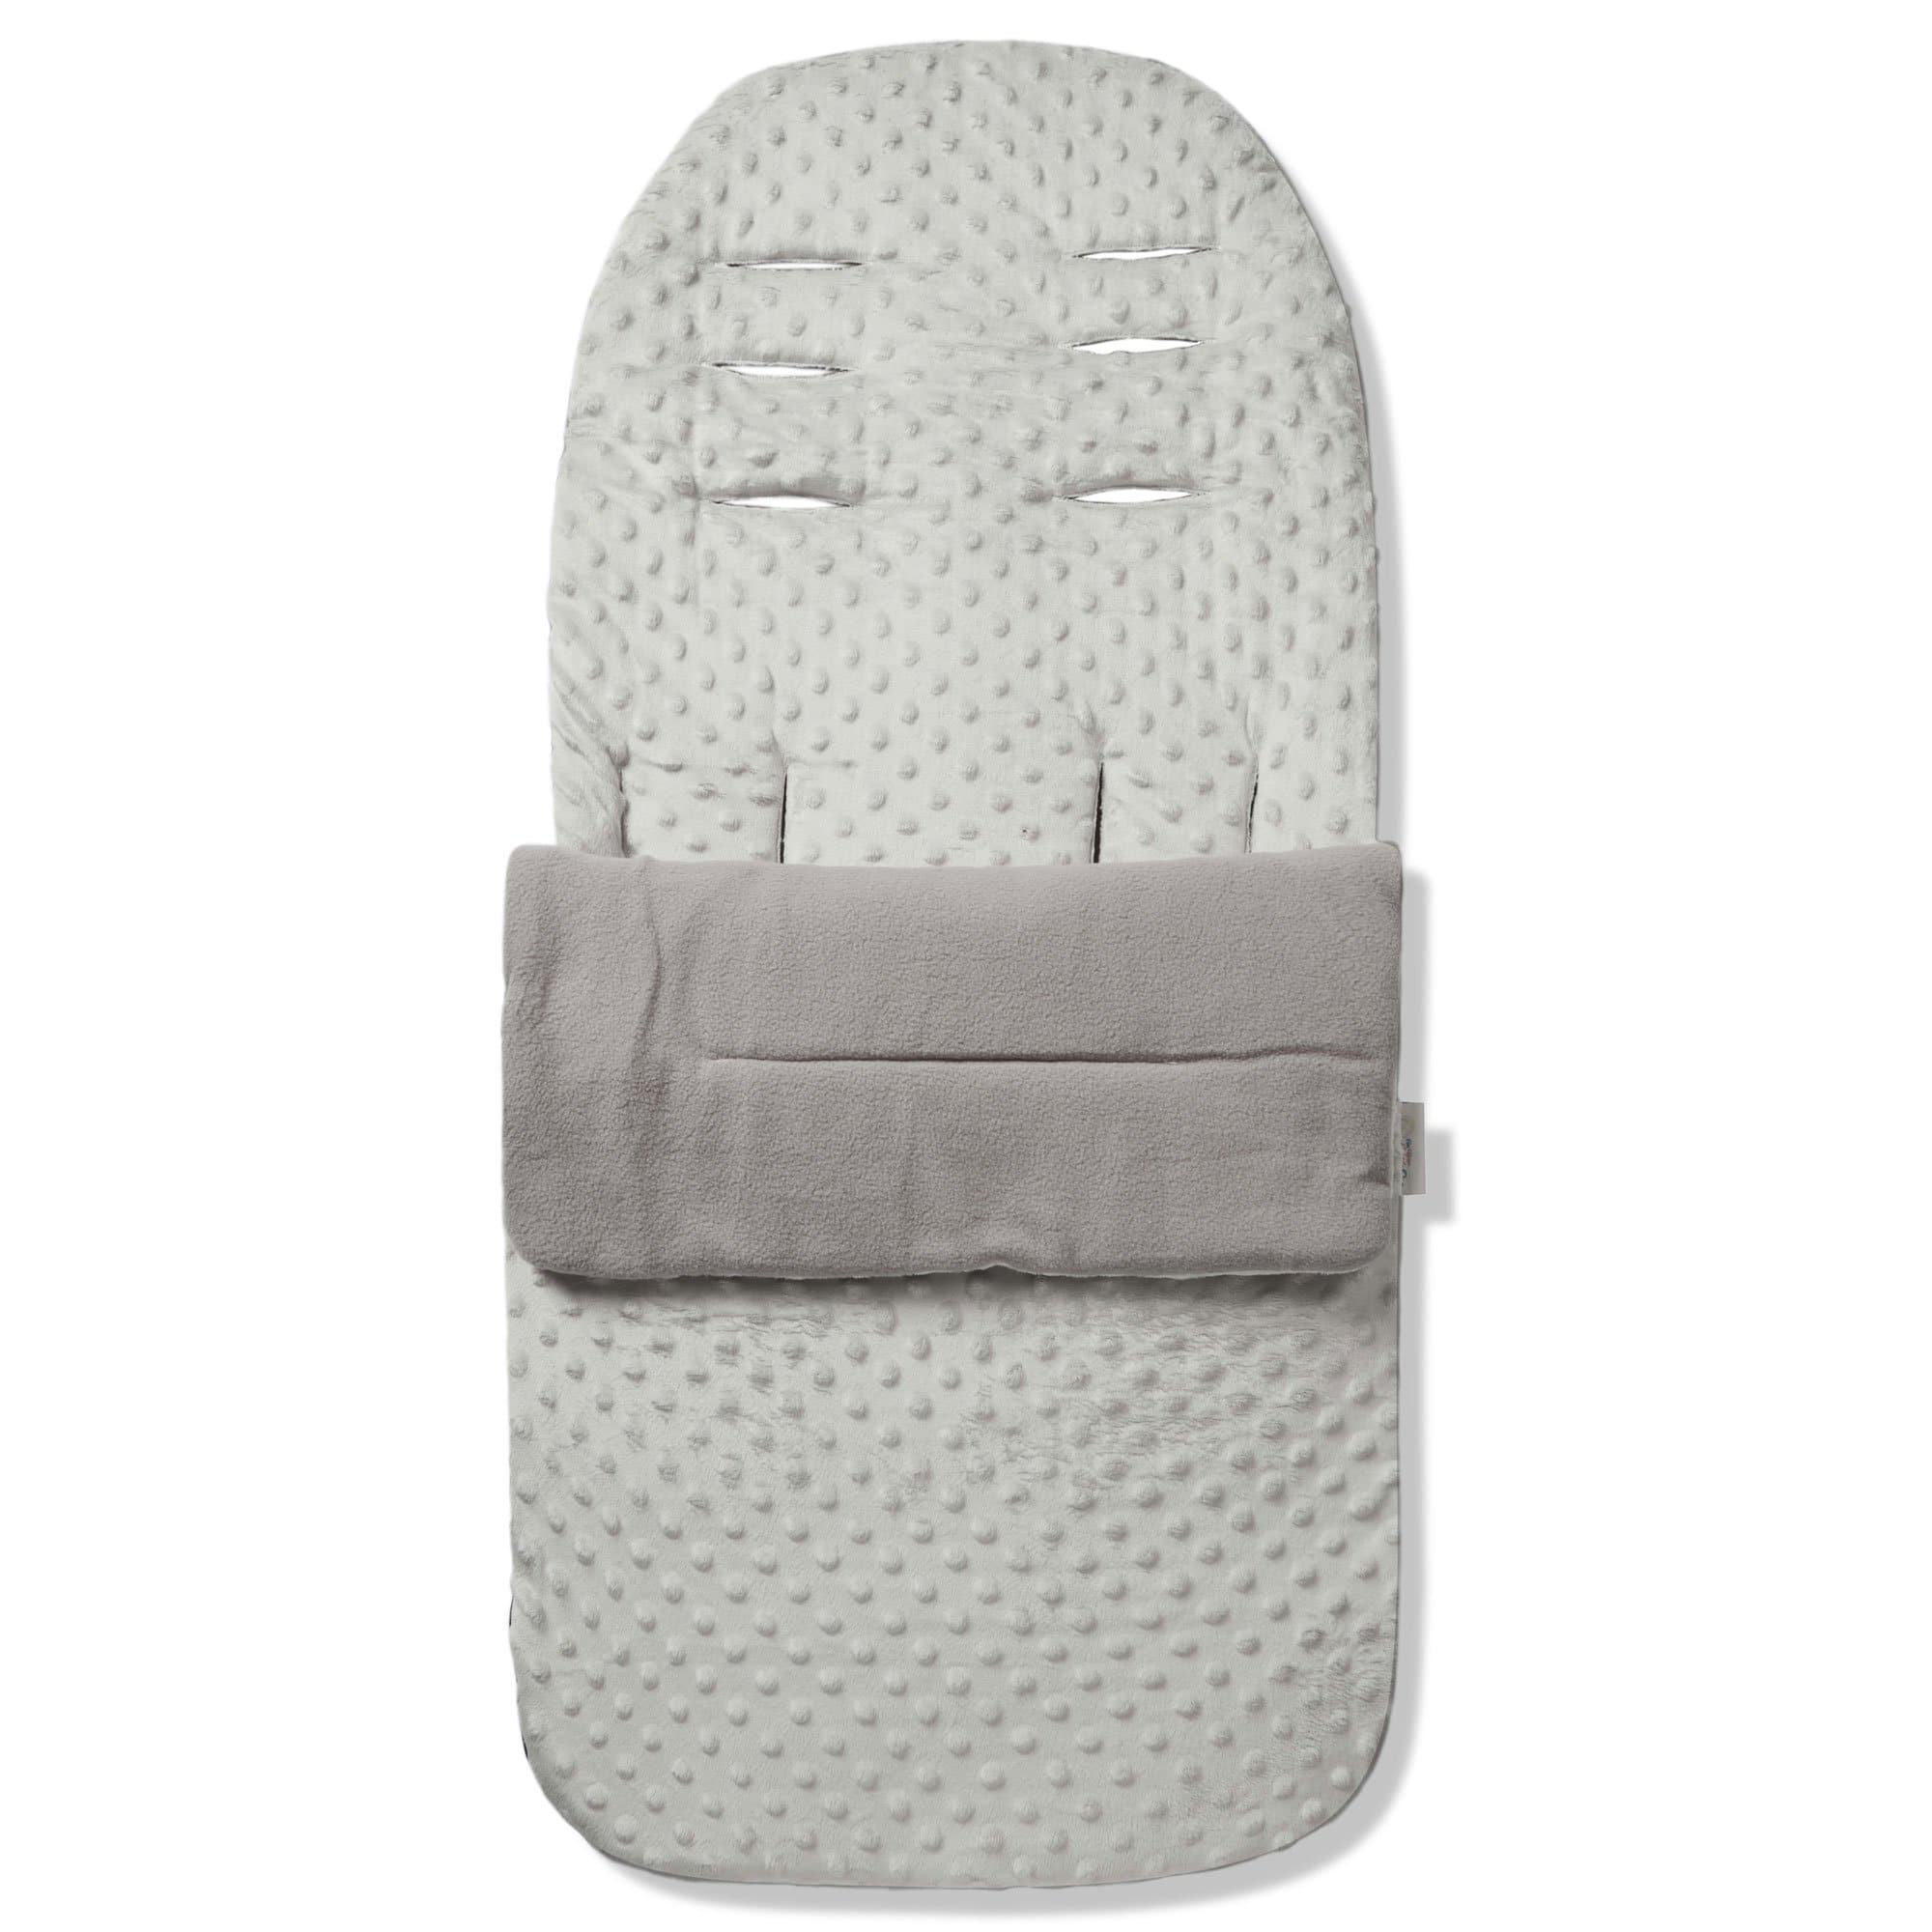 Dimple Footmuff / Cosy Toes Compatible with Stokke - Grey / Fits All Models | For Your Little One